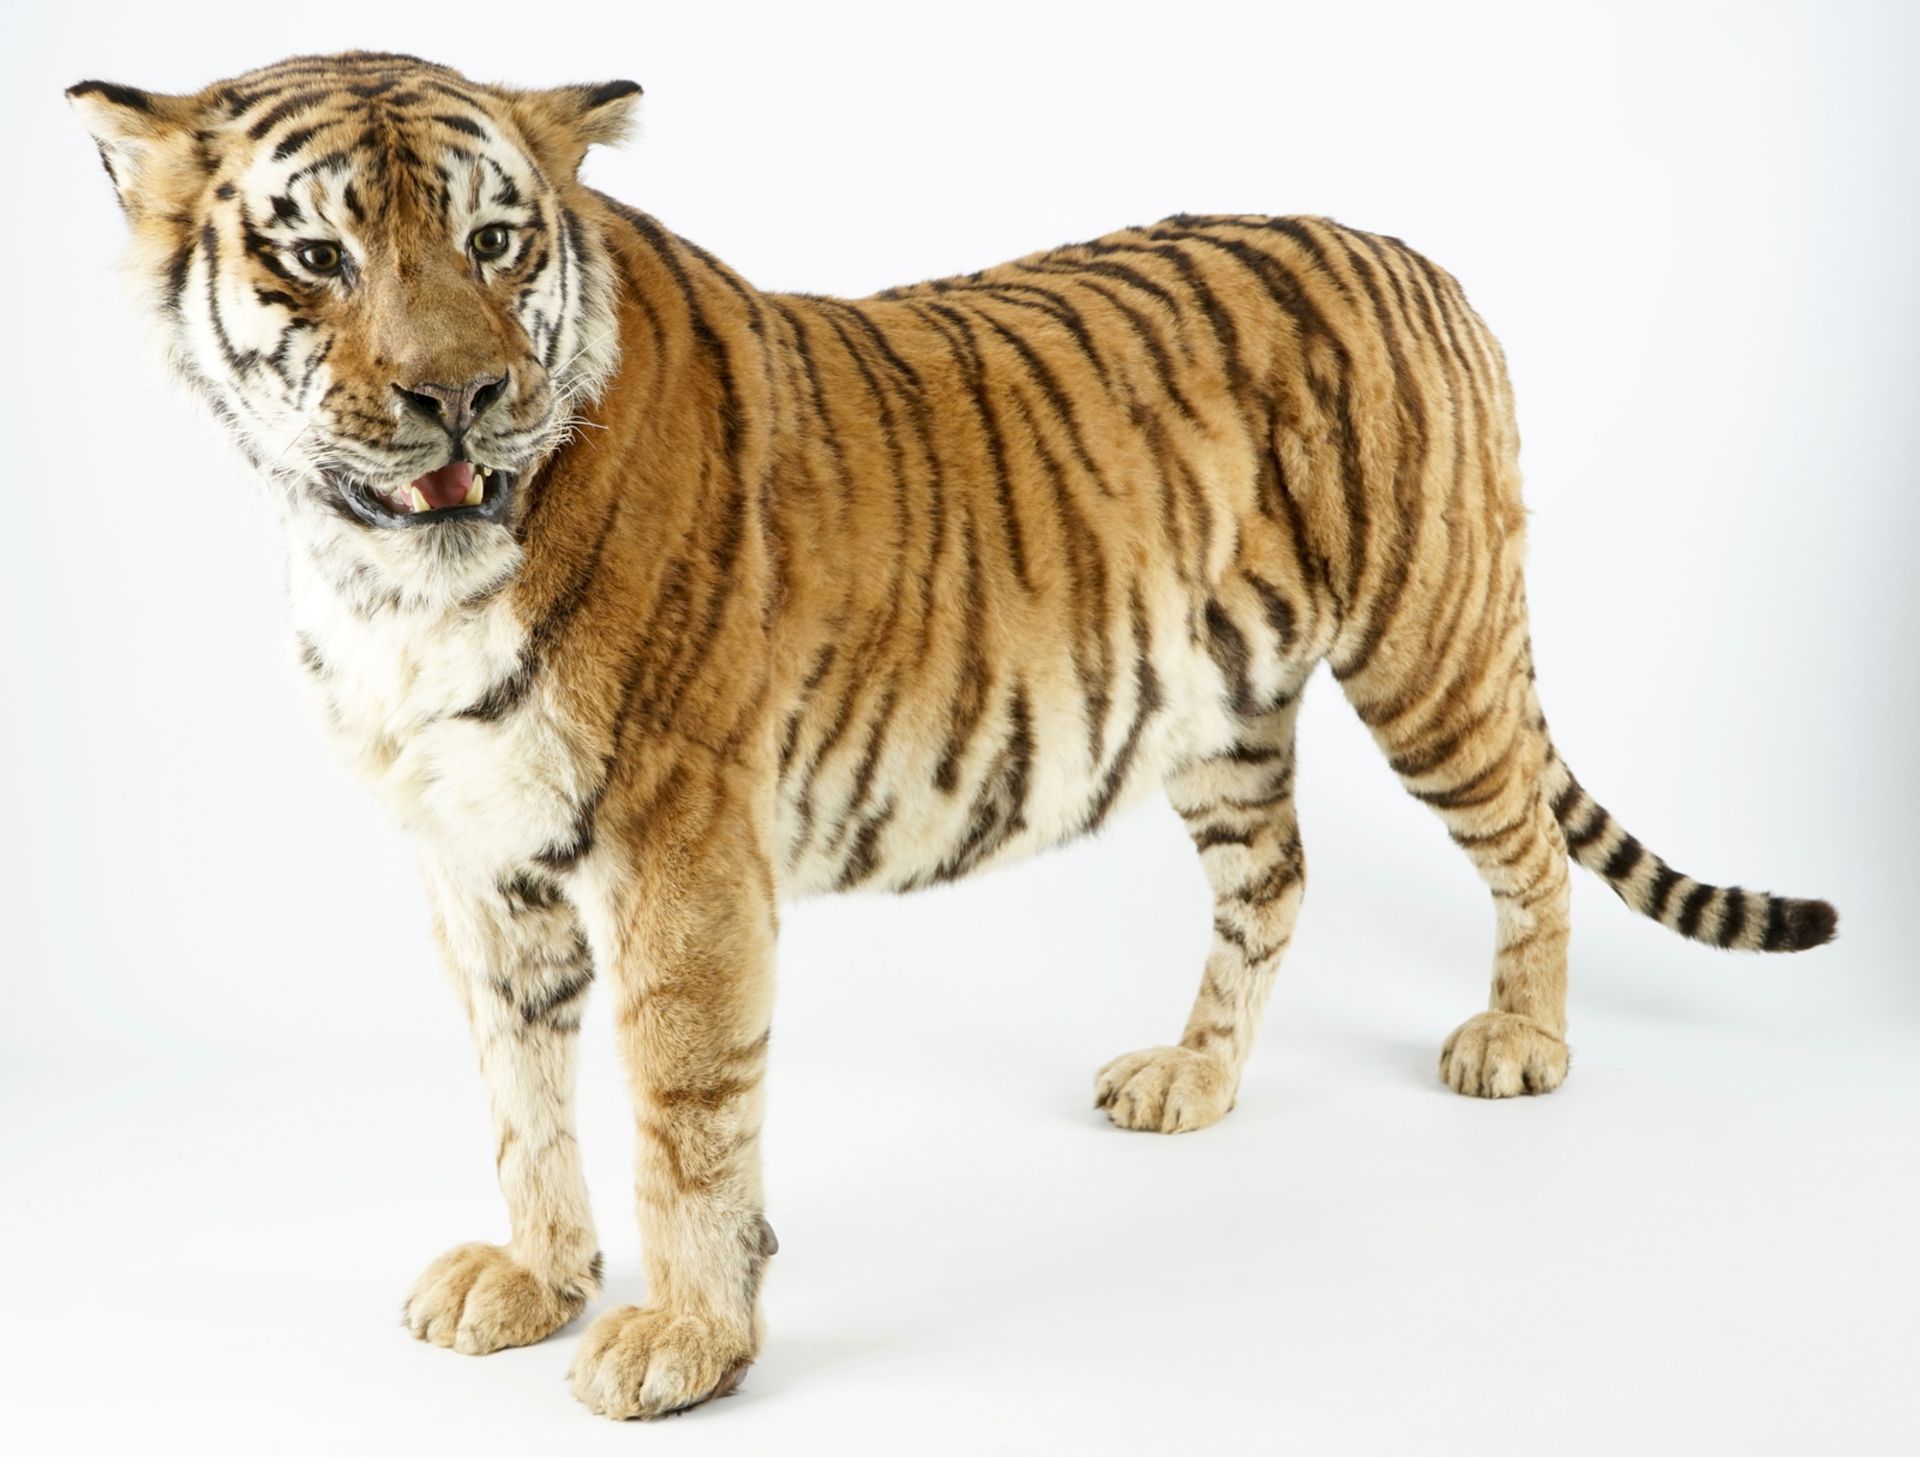 A Bengal tiger, presented standing, recent taxidermy L.: 168 cm - H.: 97 cm Of very good quality.